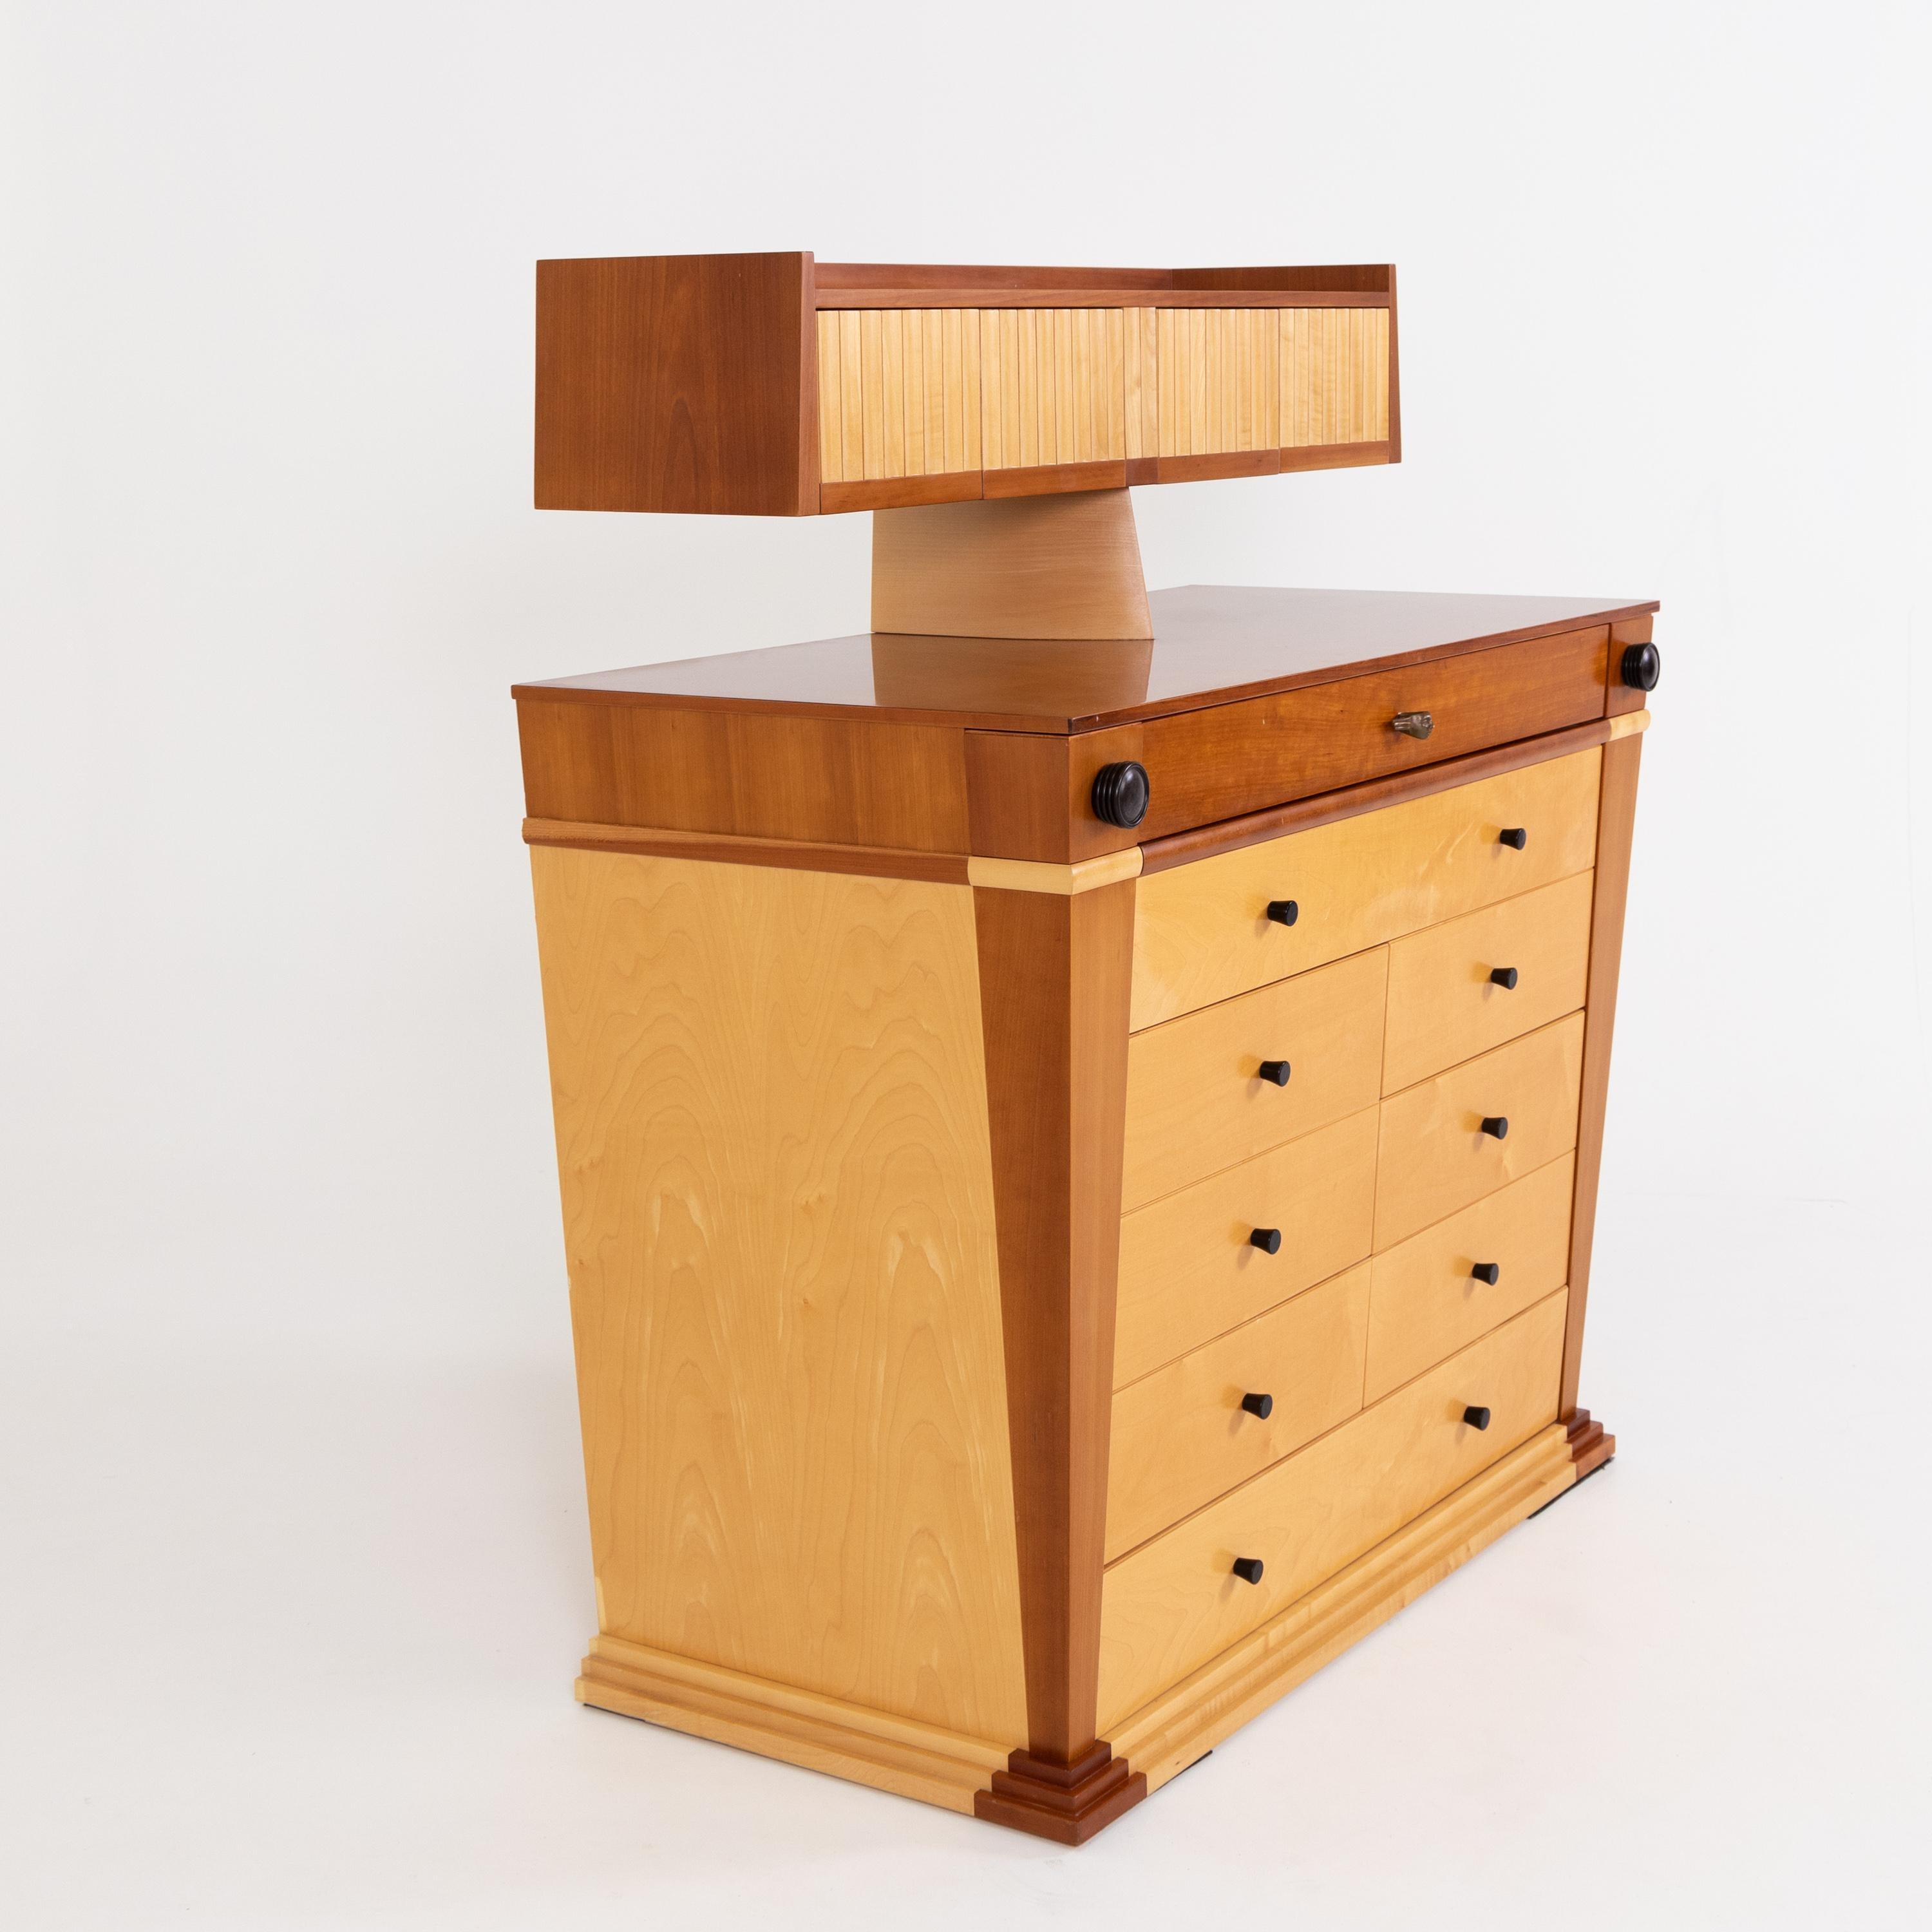 Chest of drawers designed by Massimo Scolari for Giorgetti. The chest of drawers stands on a stepped base with a total of nine drawers and a top with further compartments. Mask-shaped bronze knob on the top drawer and side pull-out compartments with